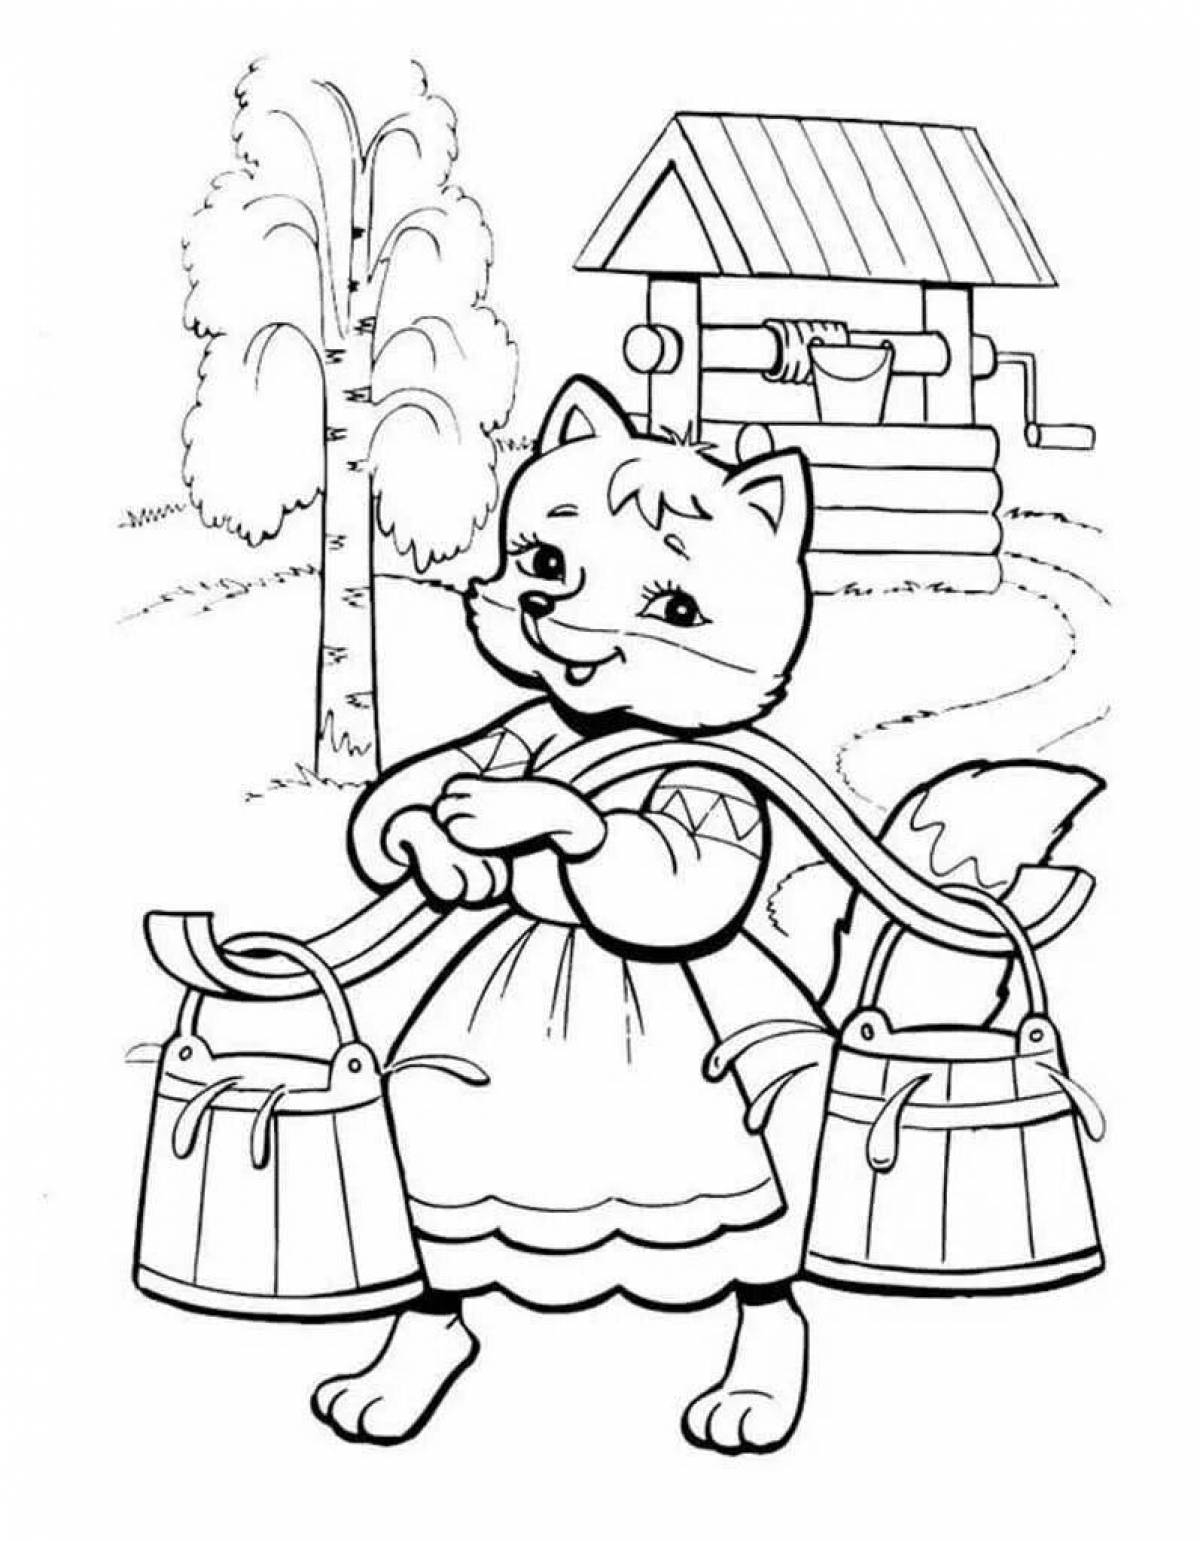 Joyful fox and crane coloring pages for kids